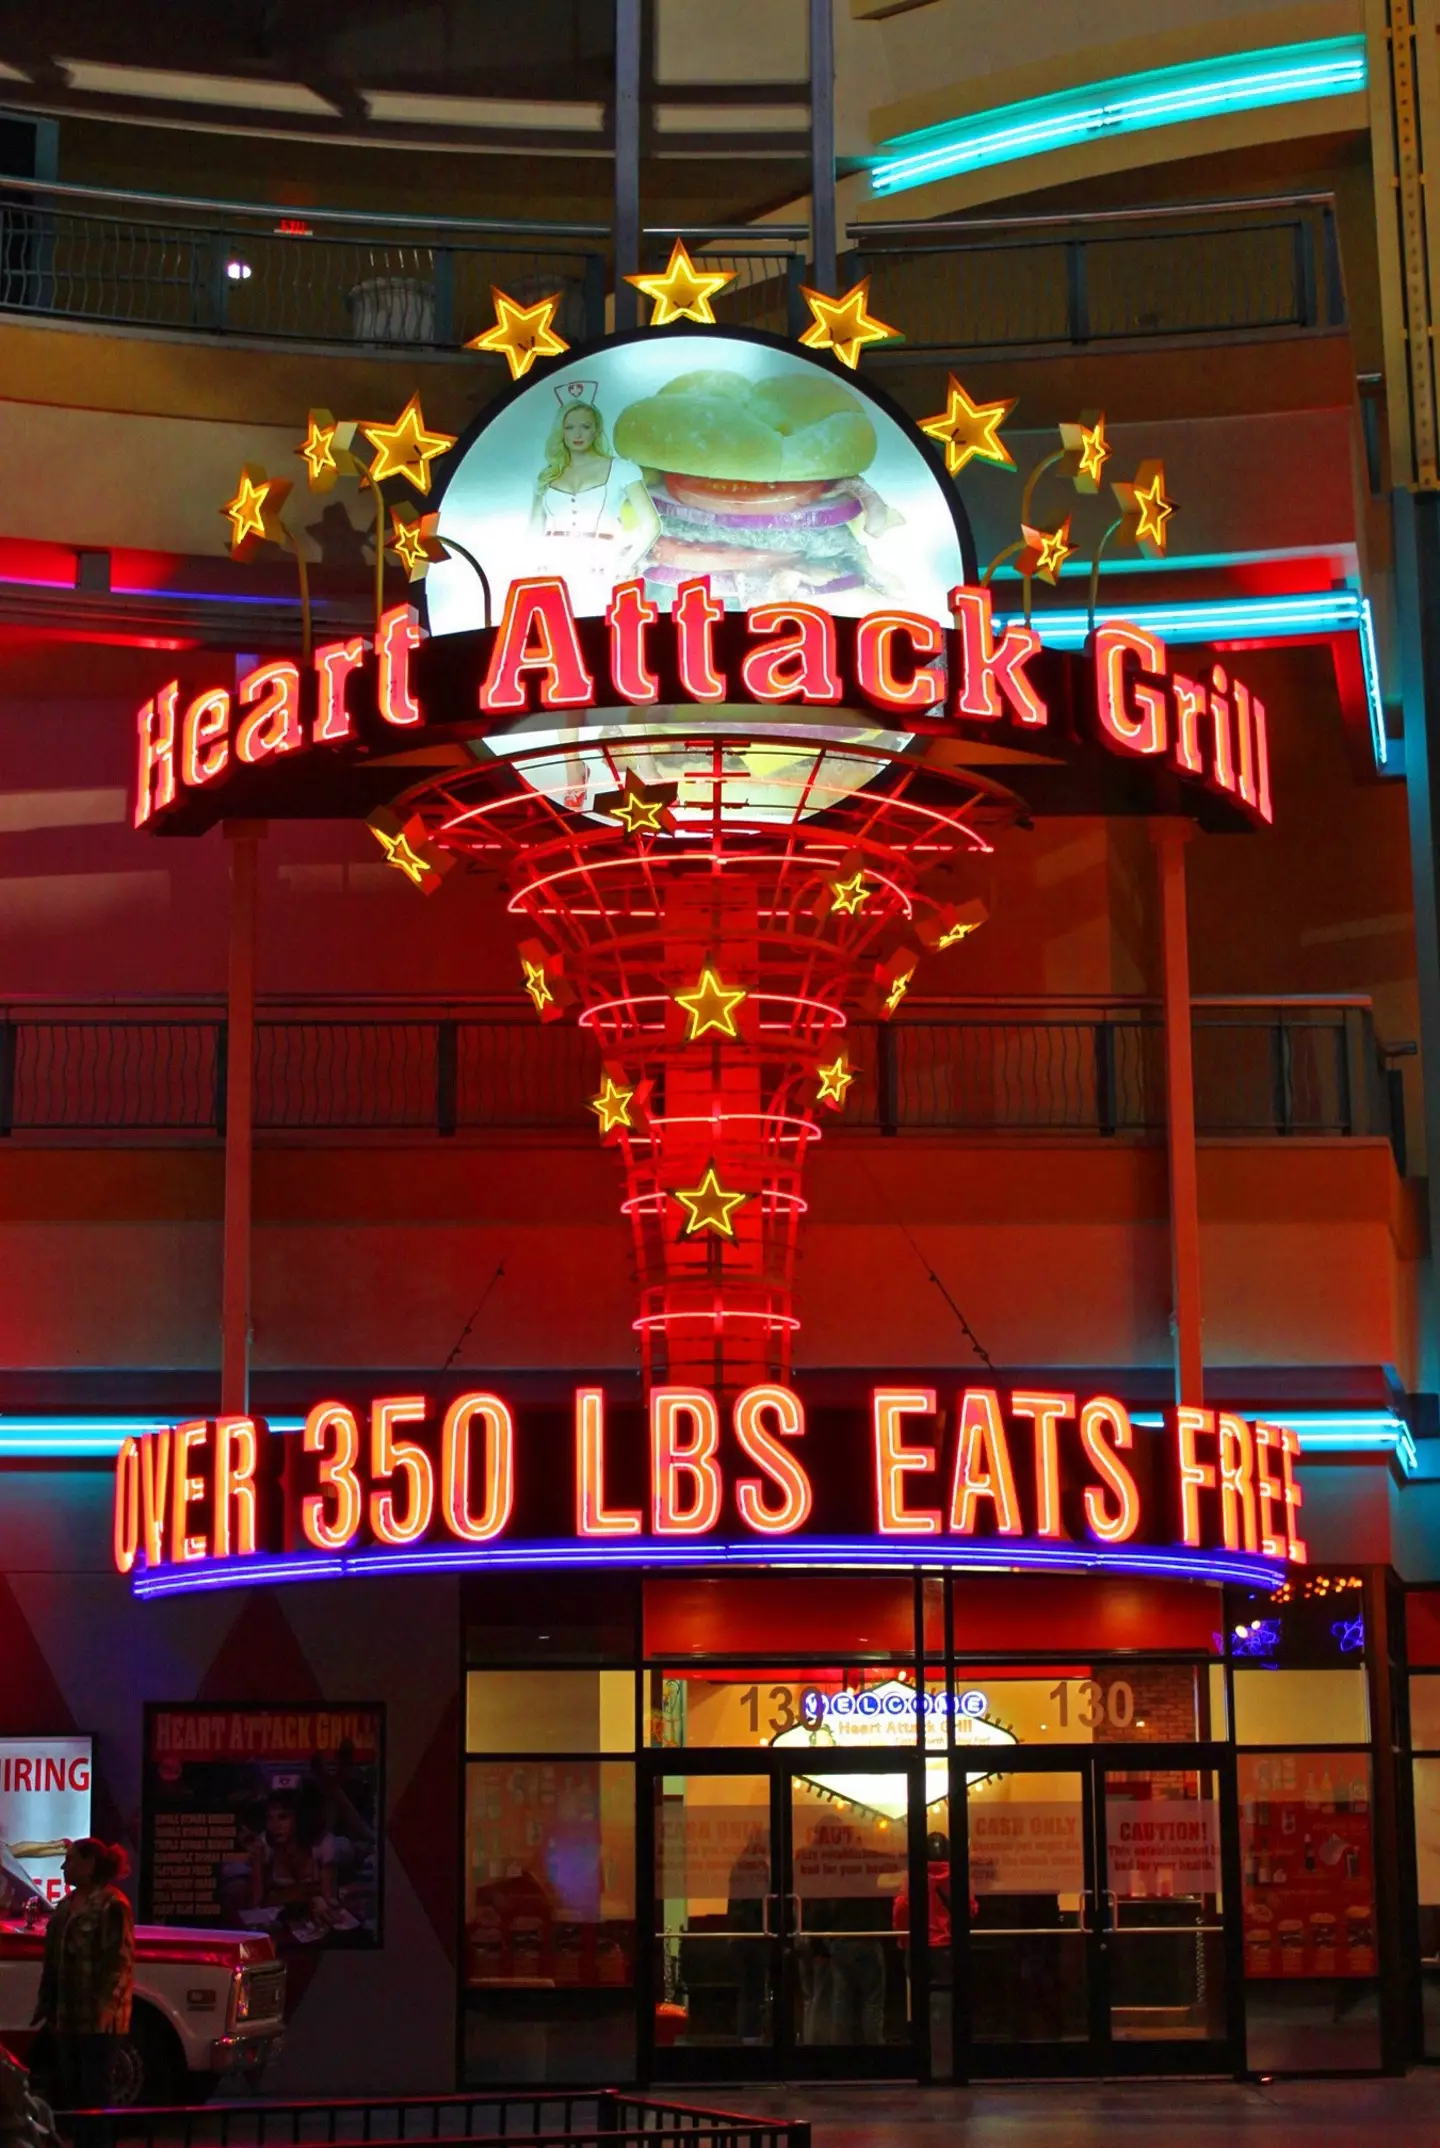 The infamous - and controversial - Heart Attack Grill.